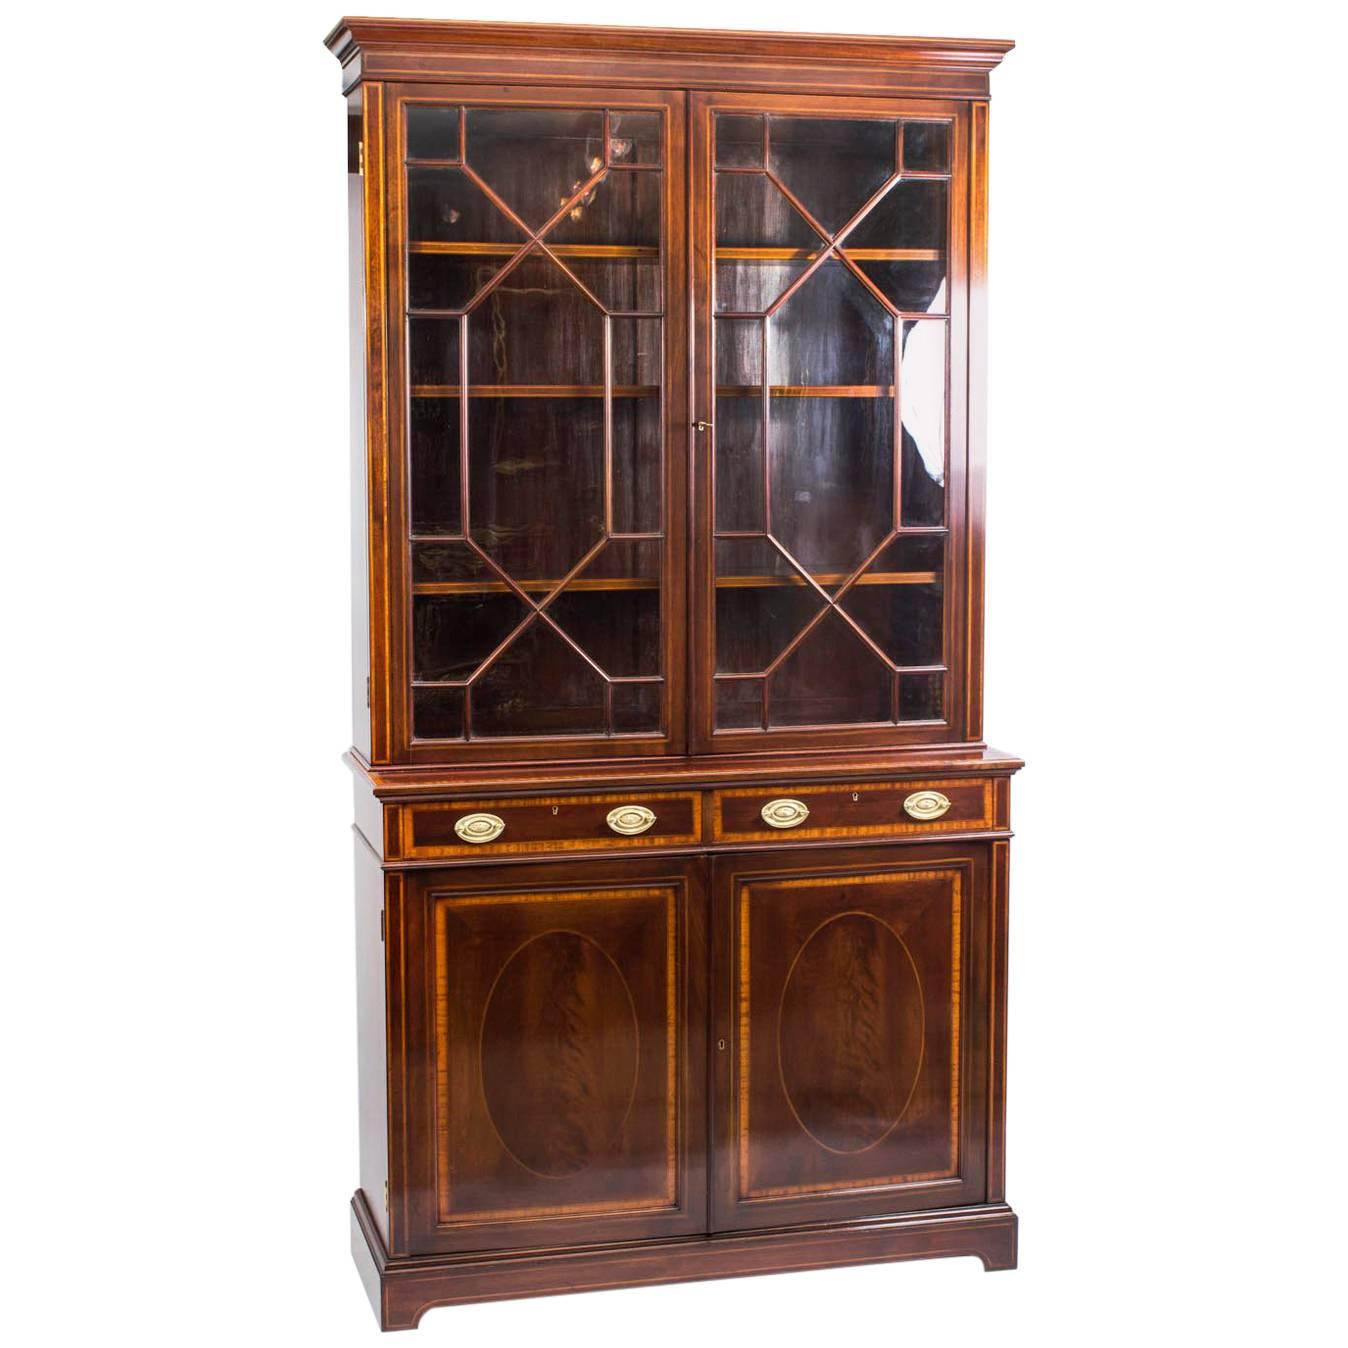 Early 20th Century Edwardian Inlaid Mahogany Bookcase by Maple & Co